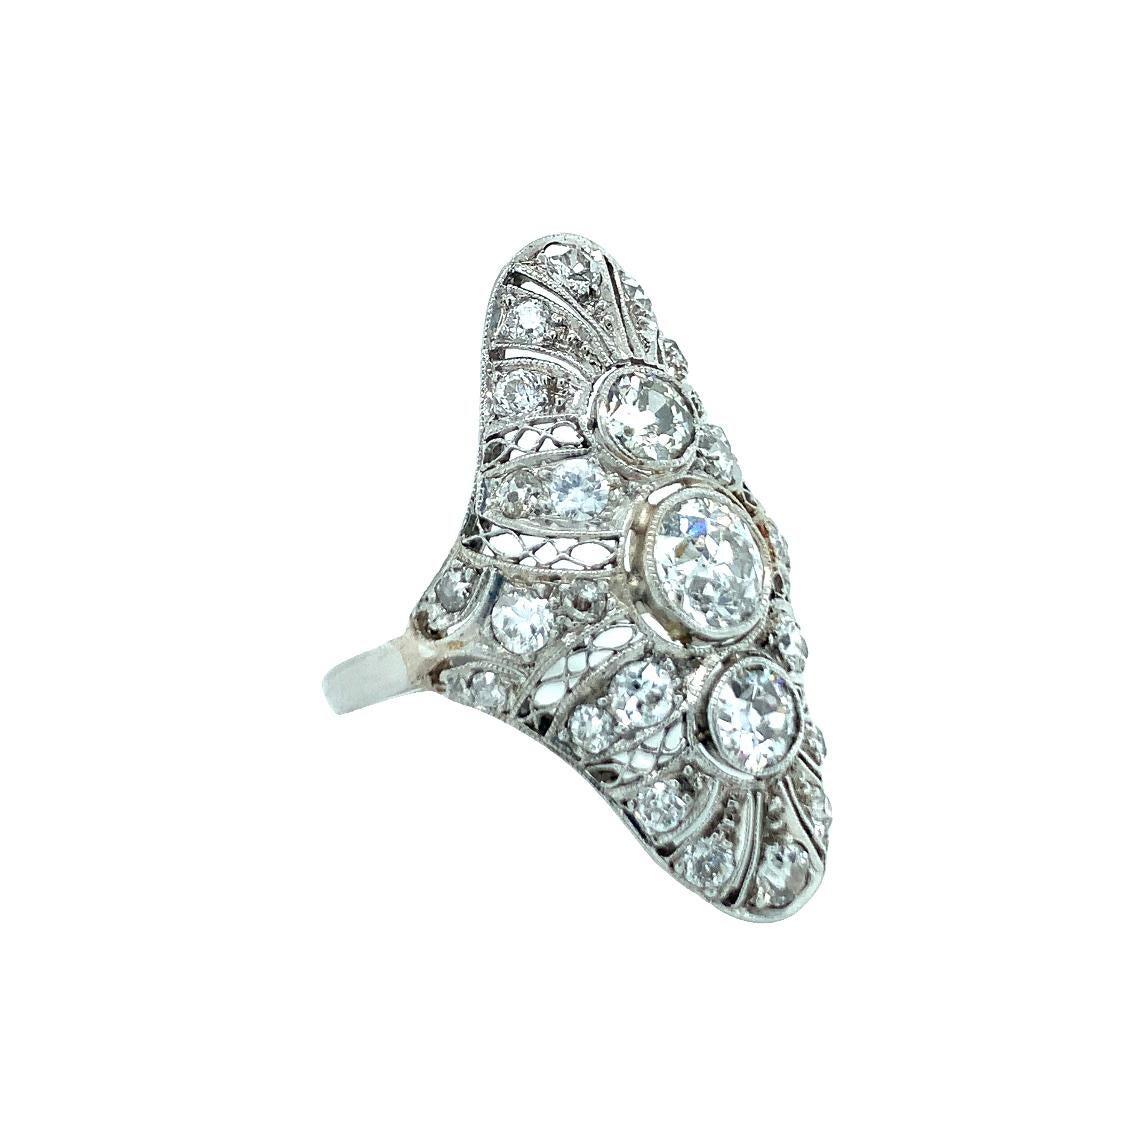 One Art Deco diamond filigree platinum ring centering one bezel set, old European cut diamond weighing 0.80 ct. and surrounded by 28 old European cut diamonds totaling 2 ct. with an average color of J-K-L and SI-2 clarity.

Unmatched, intricate,